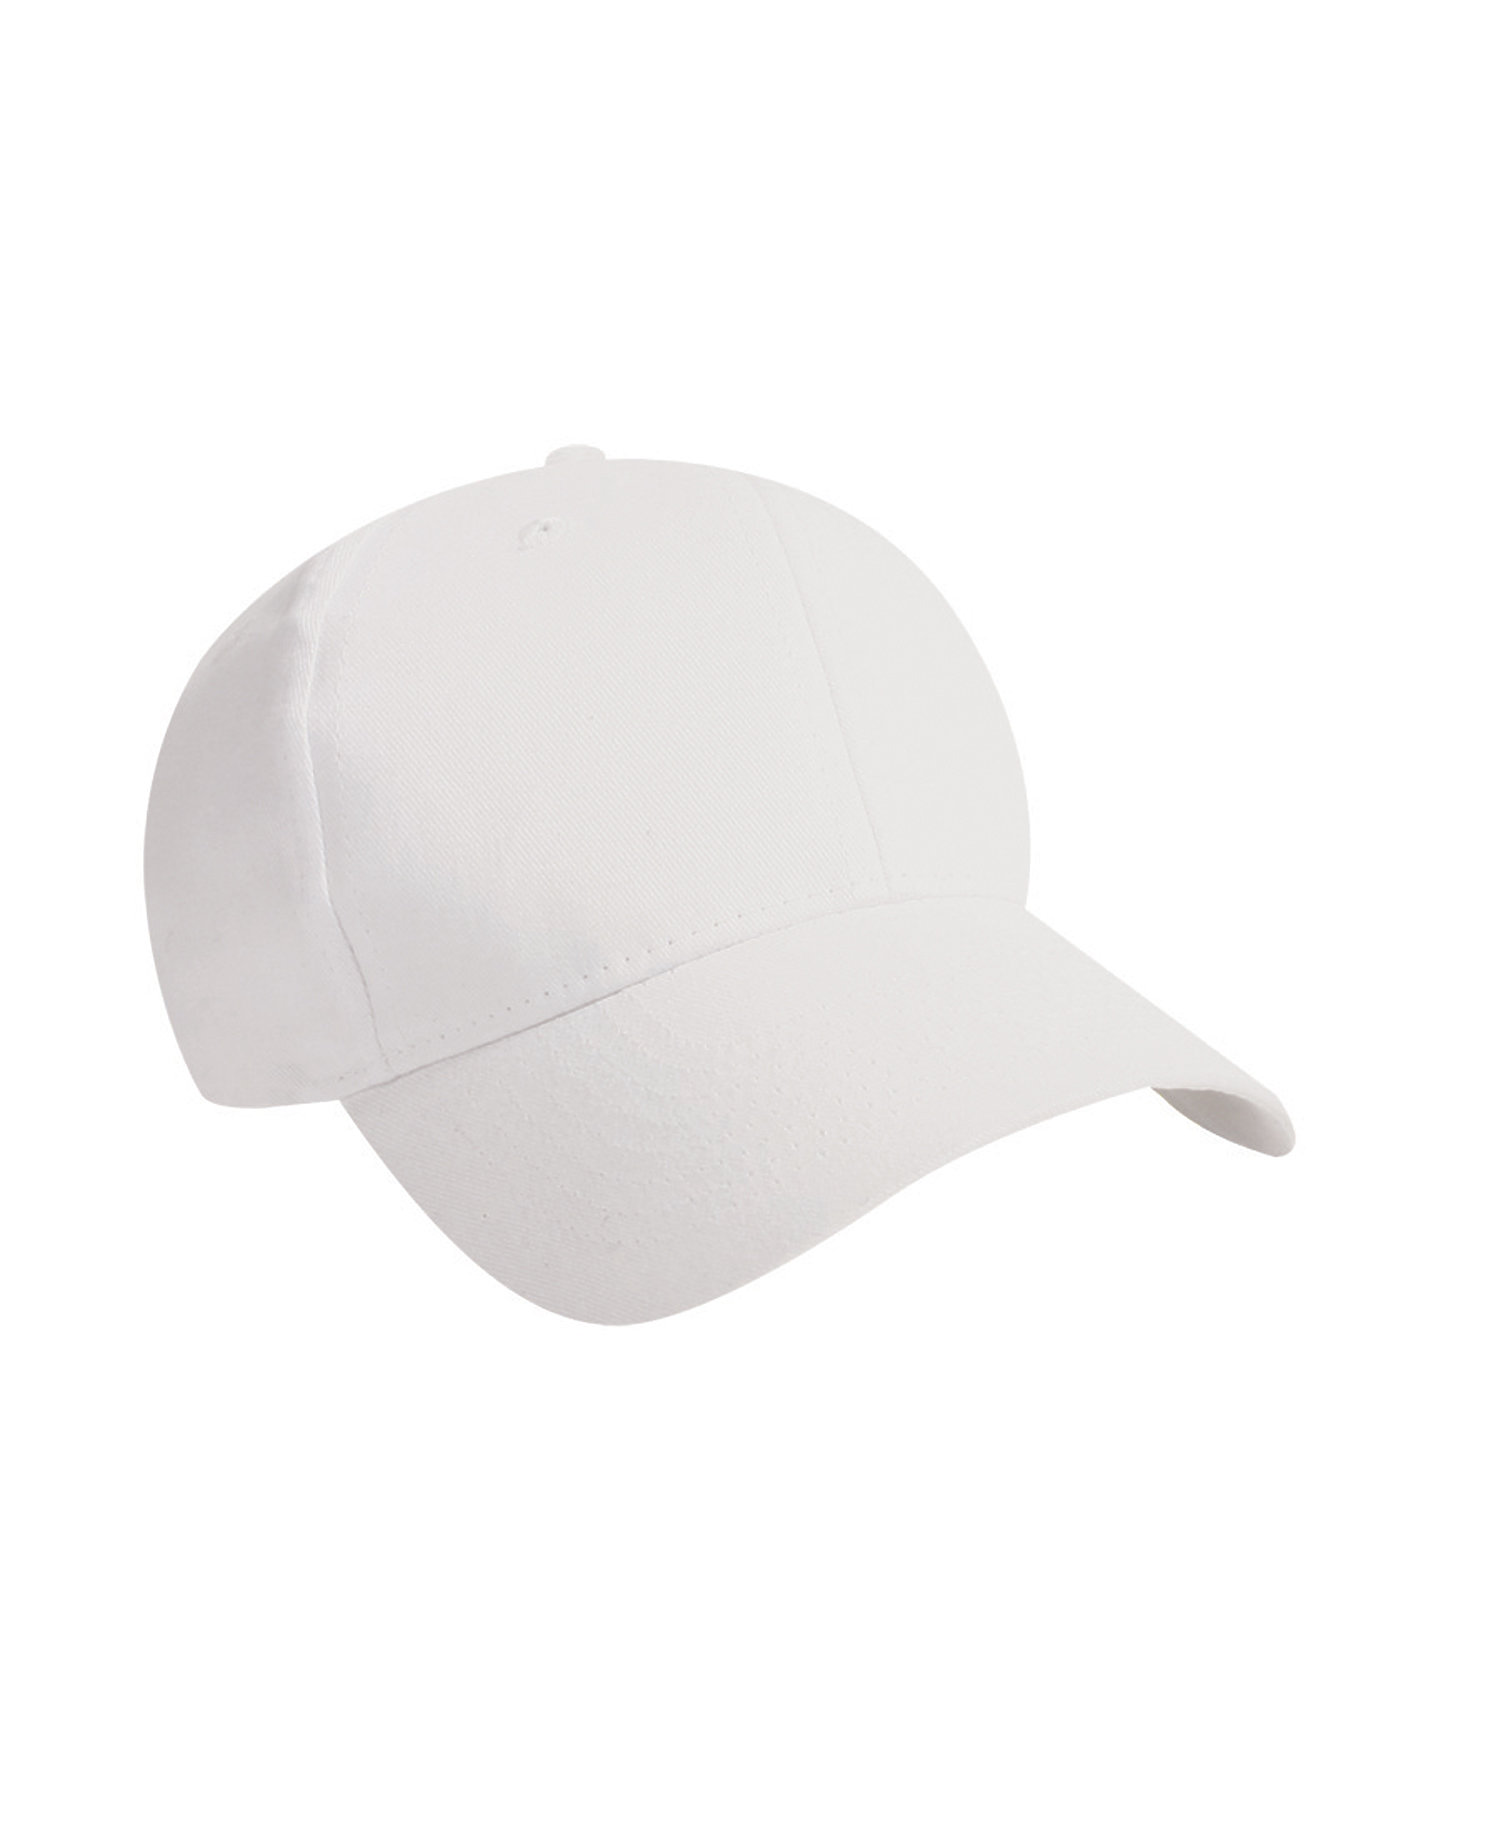 EastWest Embroidery 6210 - Constructed Brushed Cotton Twill Cap